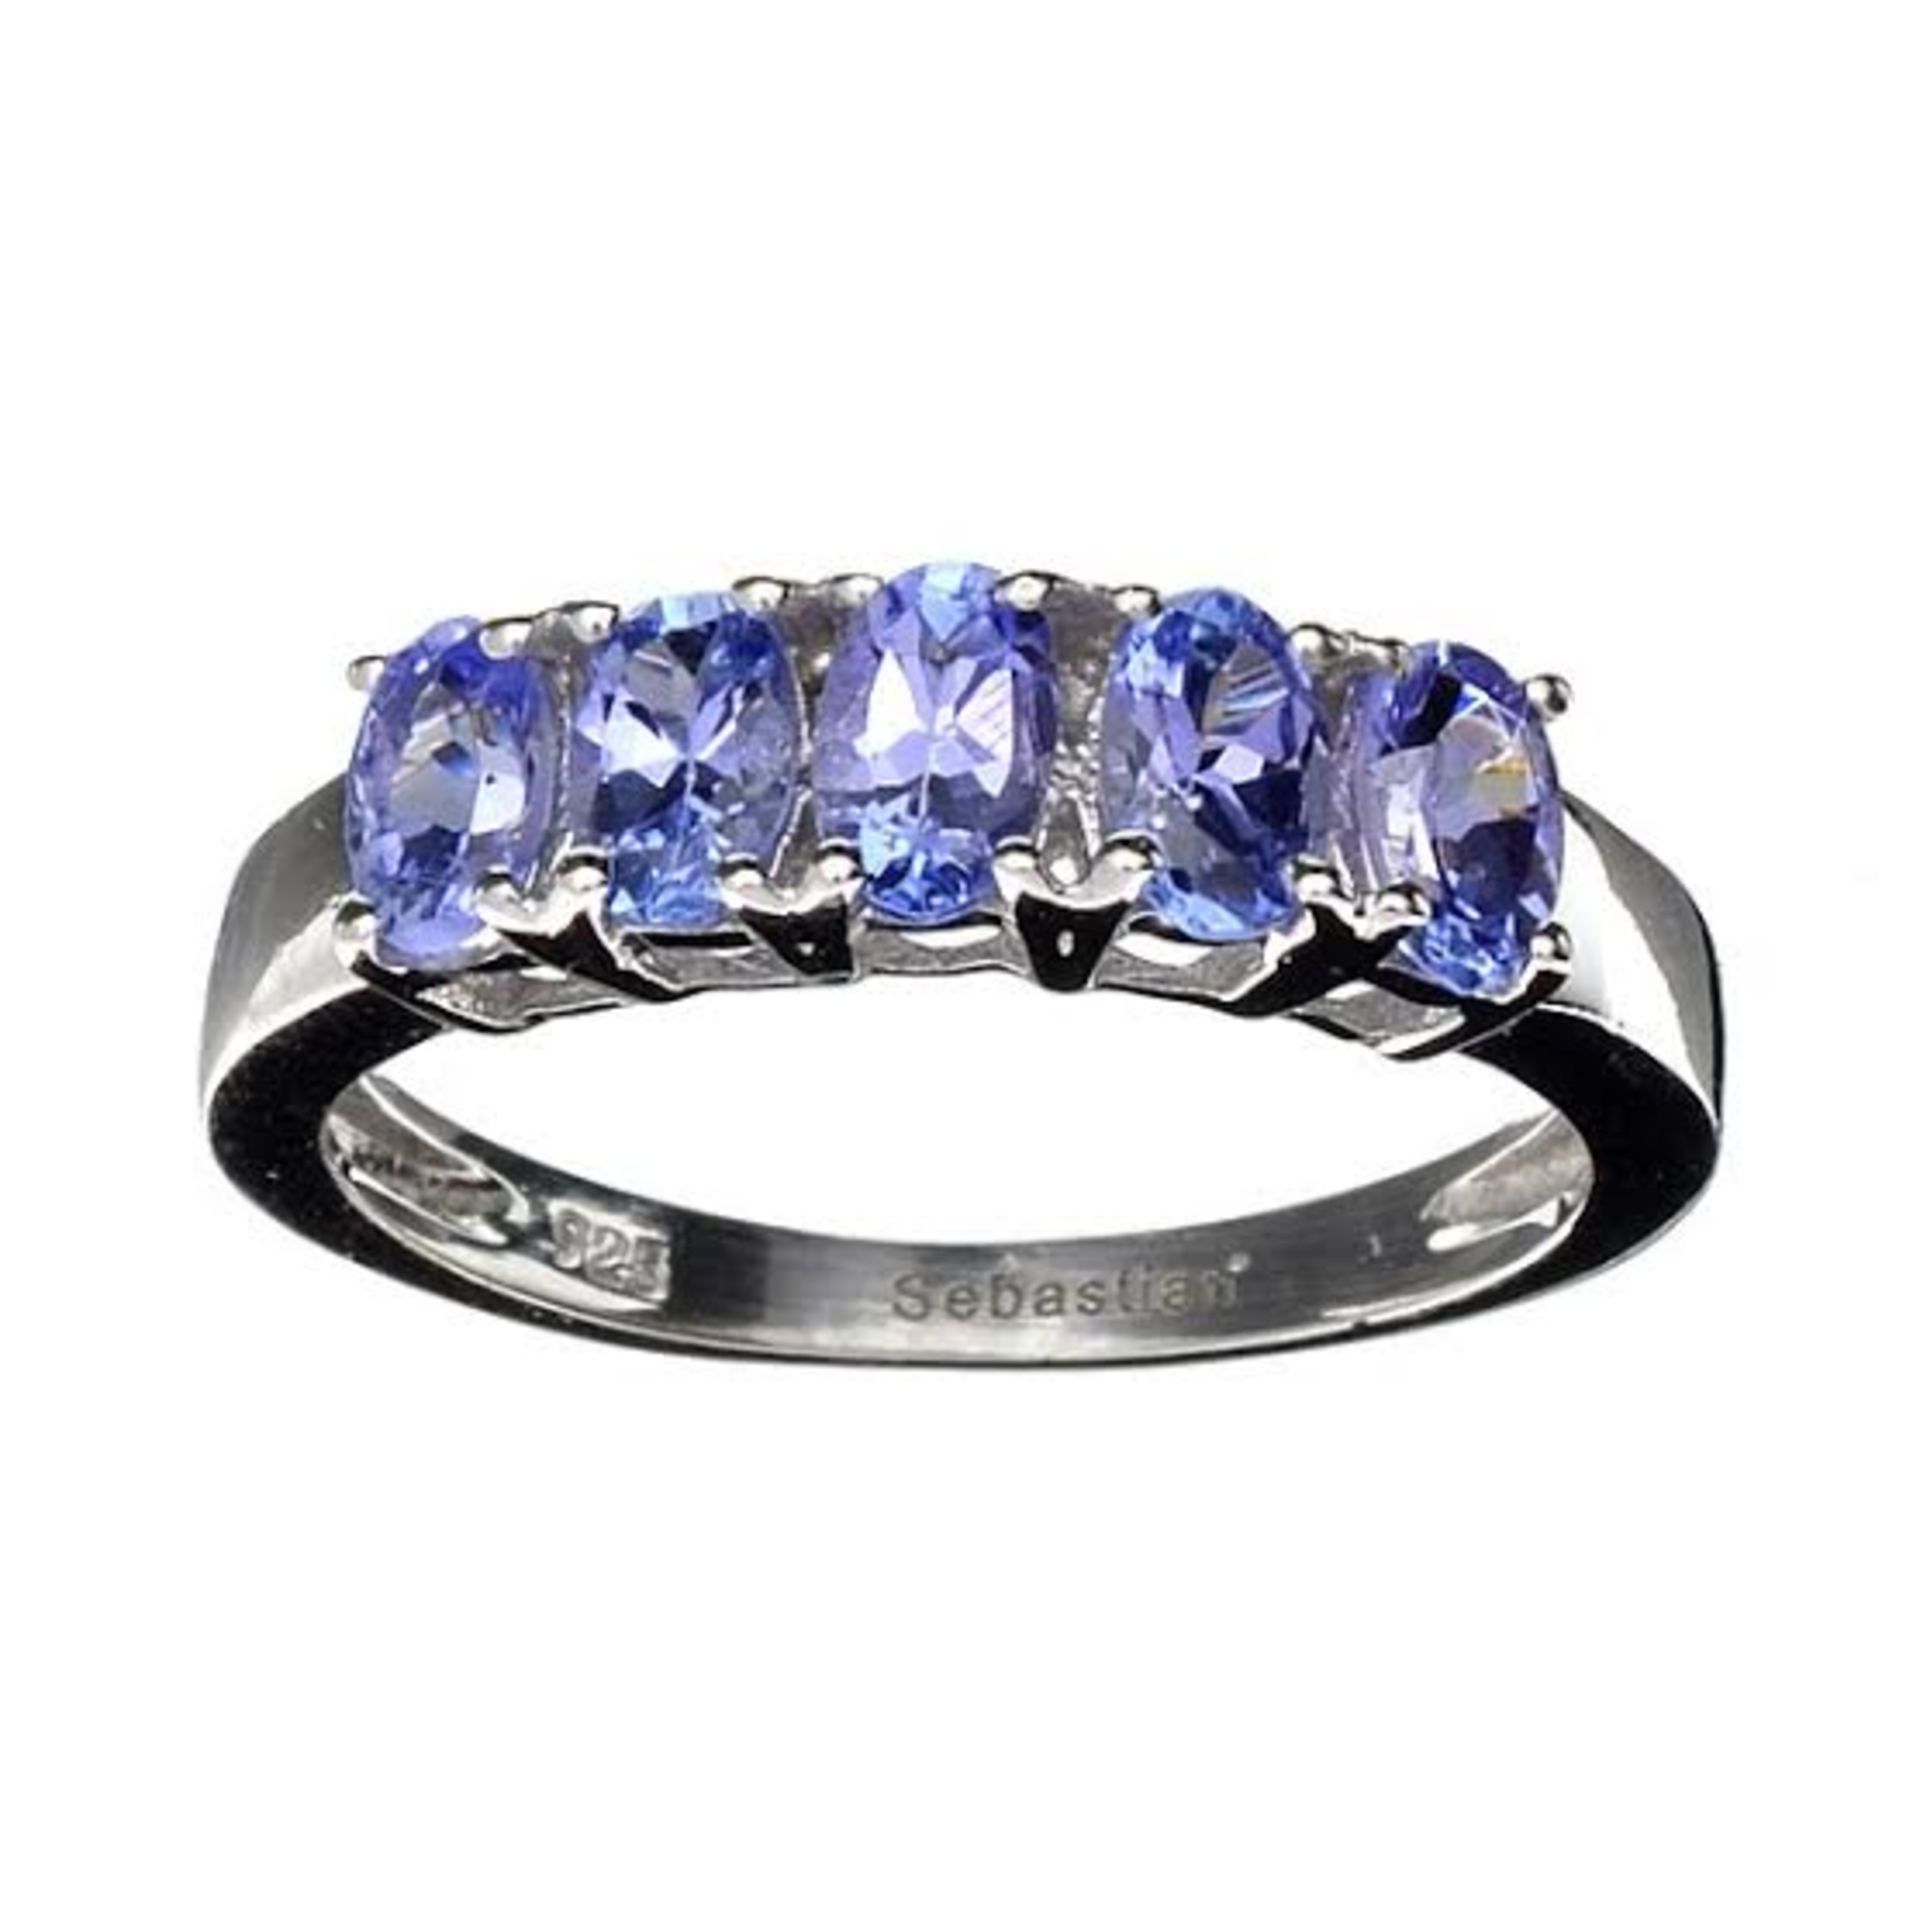 5 x Oval Cut Tanzanite = 1.75 carat And Platinum Over Silver Ring, size M-N, weight 1.75 grams